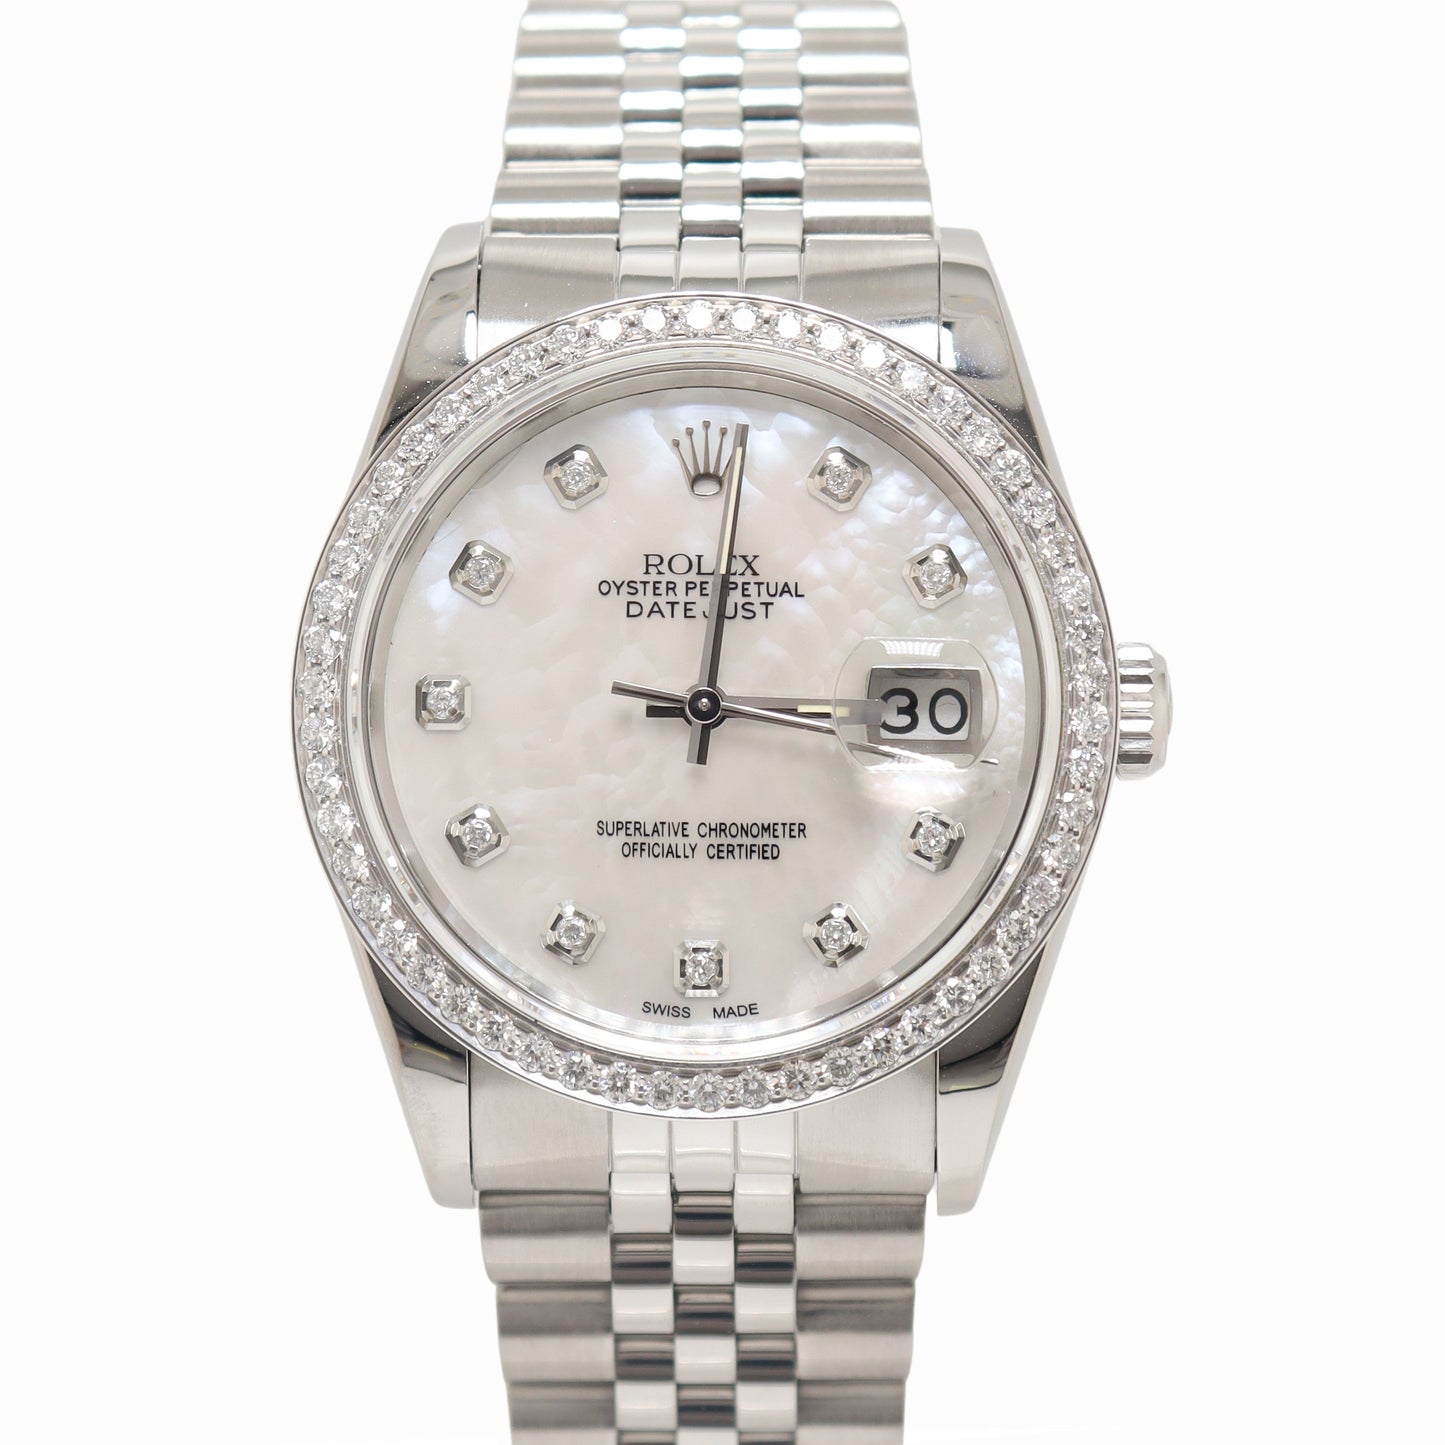 Rolex Datejust Stainless Steel 36mm Custom White MOP Diamond Dial Watch Reference# 16234